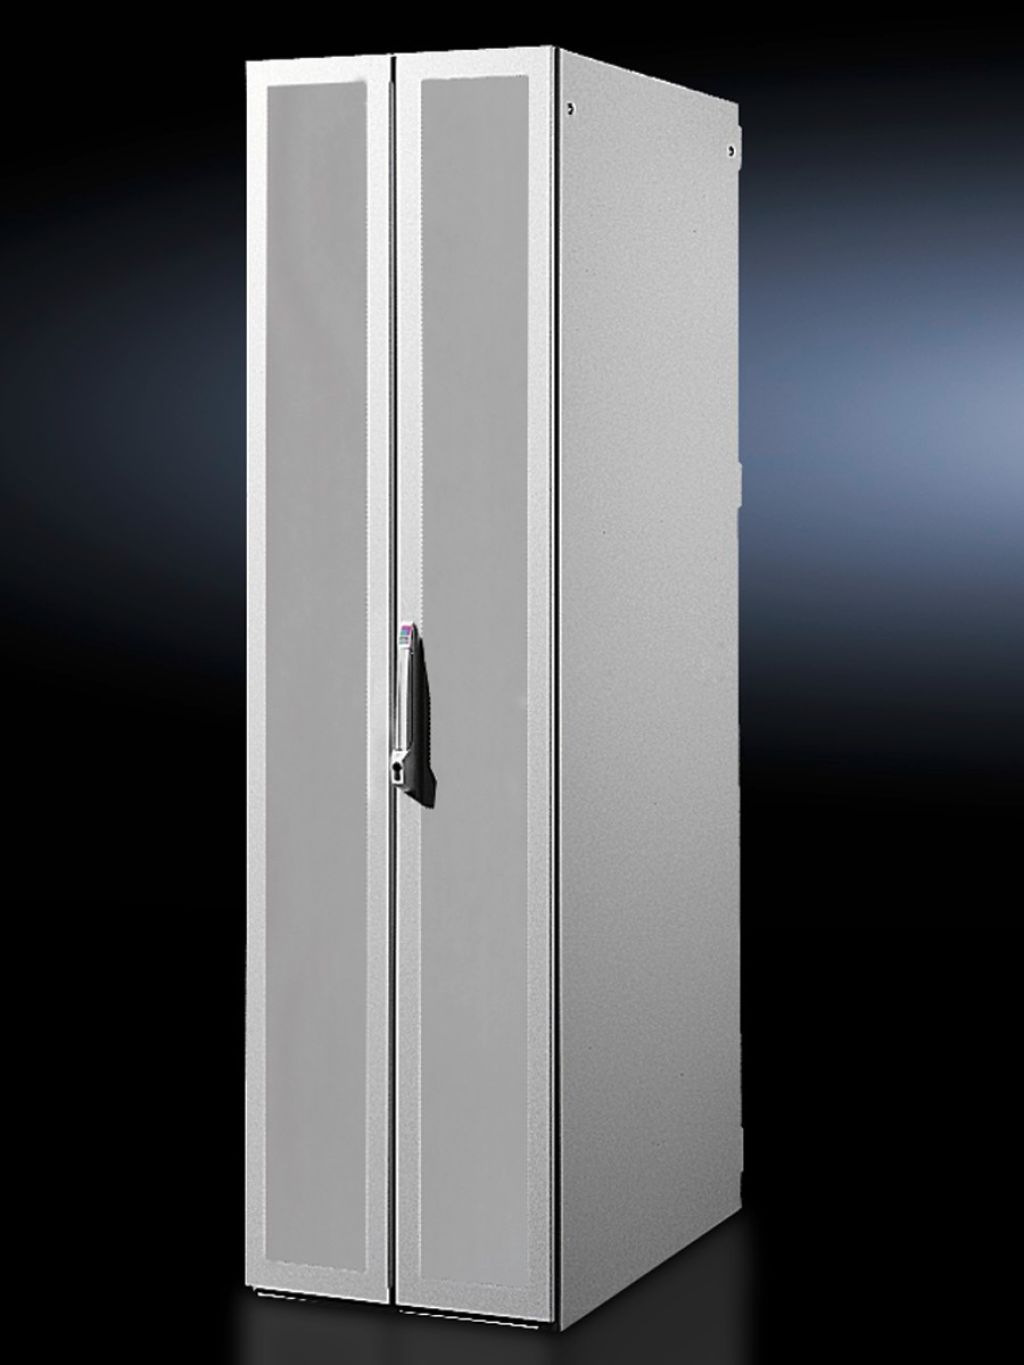 Carbon steel door, vertically divided, closed for DK-TS